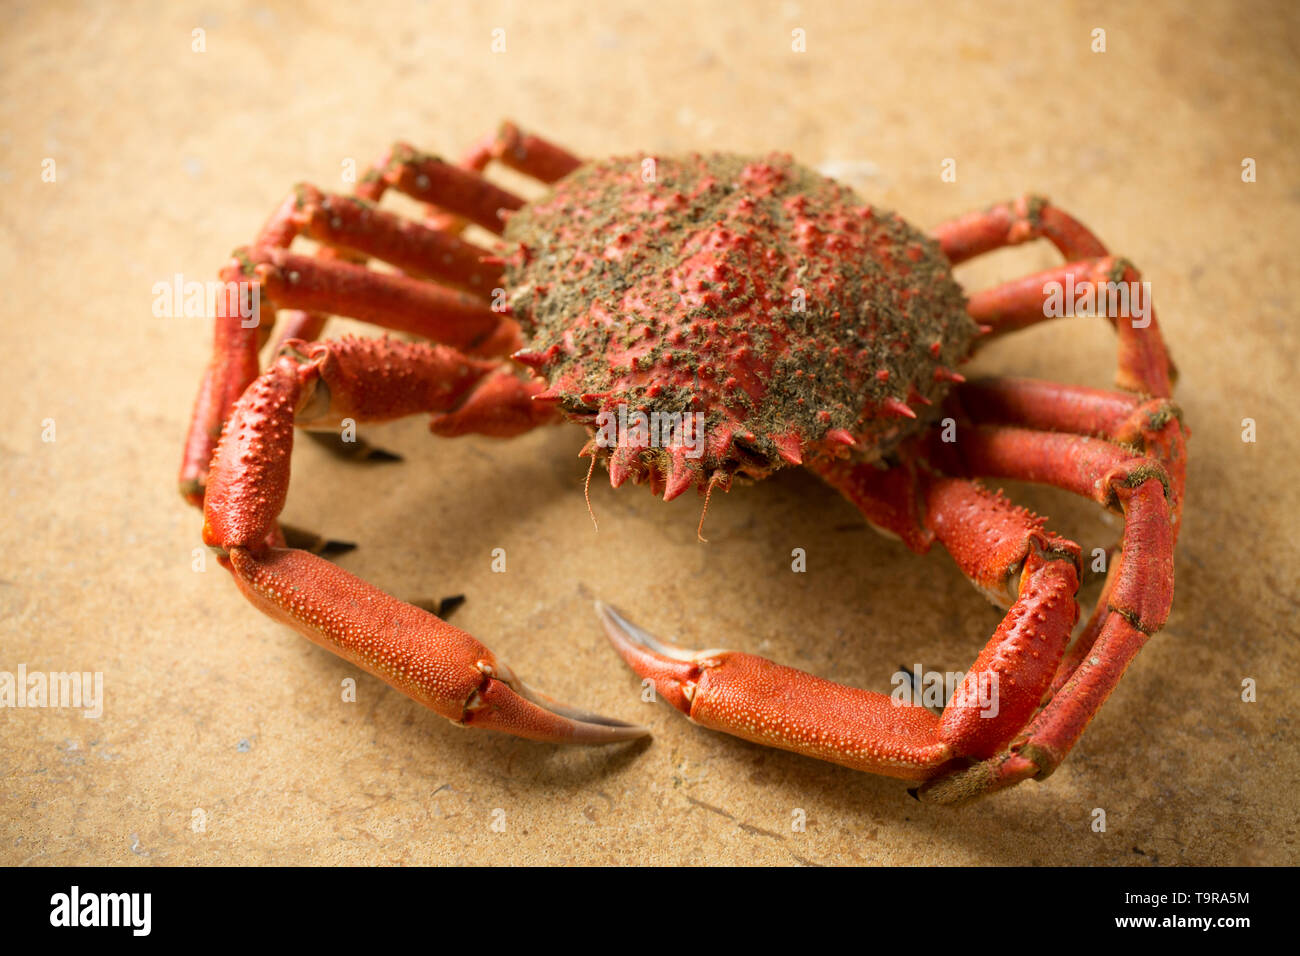 A boiled, cooked European spider crab, Maja brachydactyla, that was caught from a pier in the UK in a baited drop net. It has been boiled and is ready Stock Photo